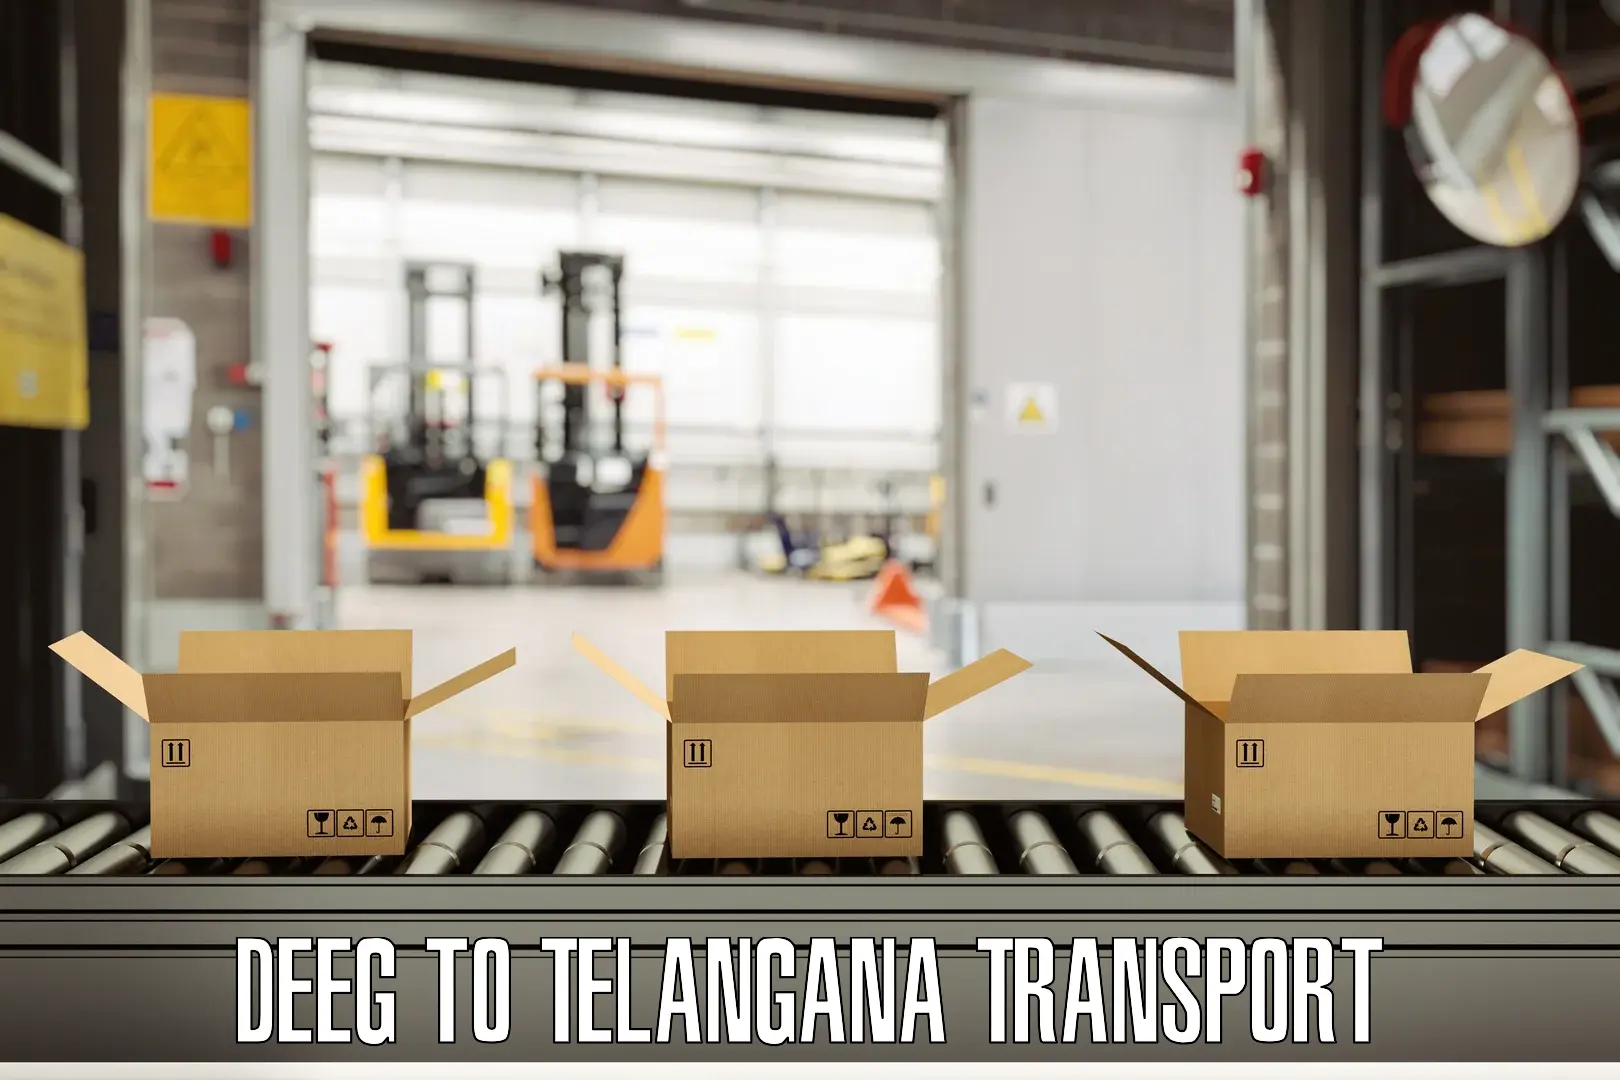 Commercial transport service Deeg to Vemulawada